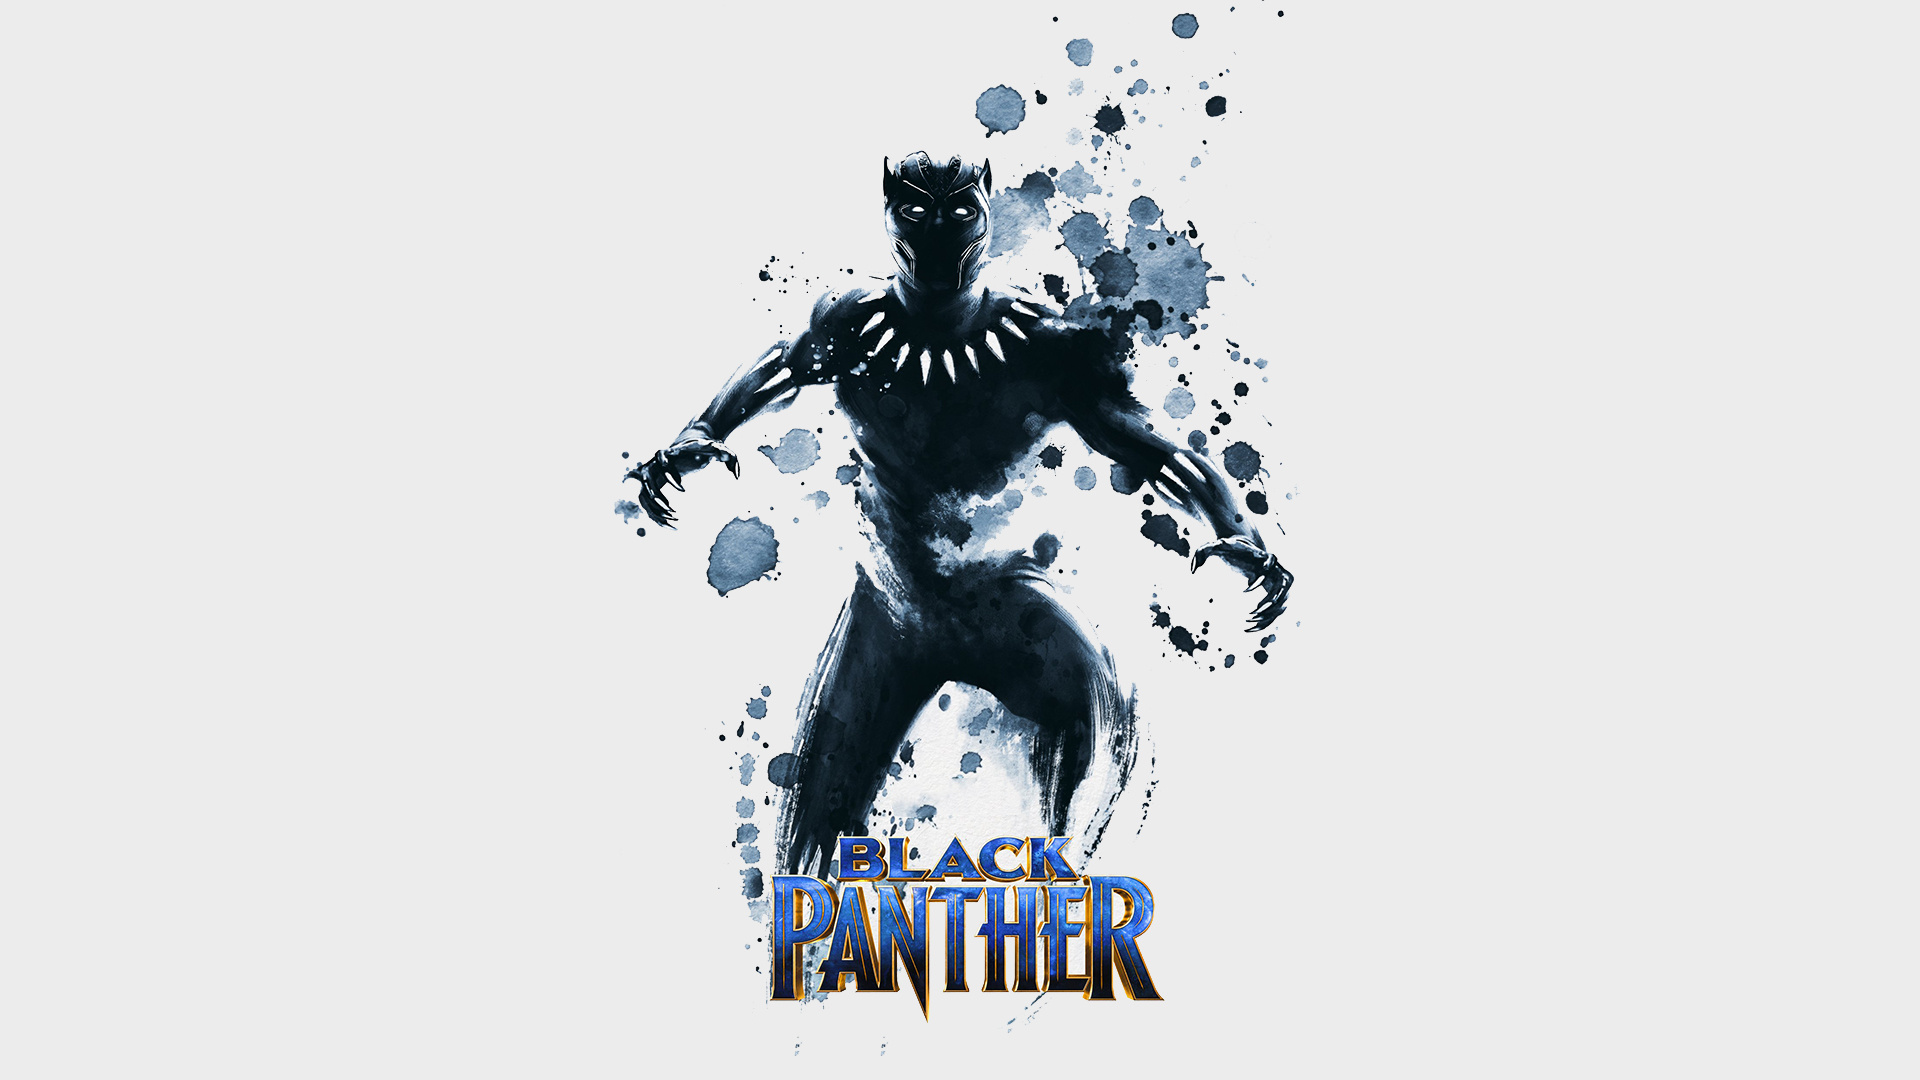 International movie poster, High resolution wallpapers, Epic black panther, Cinematic masterpiece, 1920x1080 Full HD Desktop